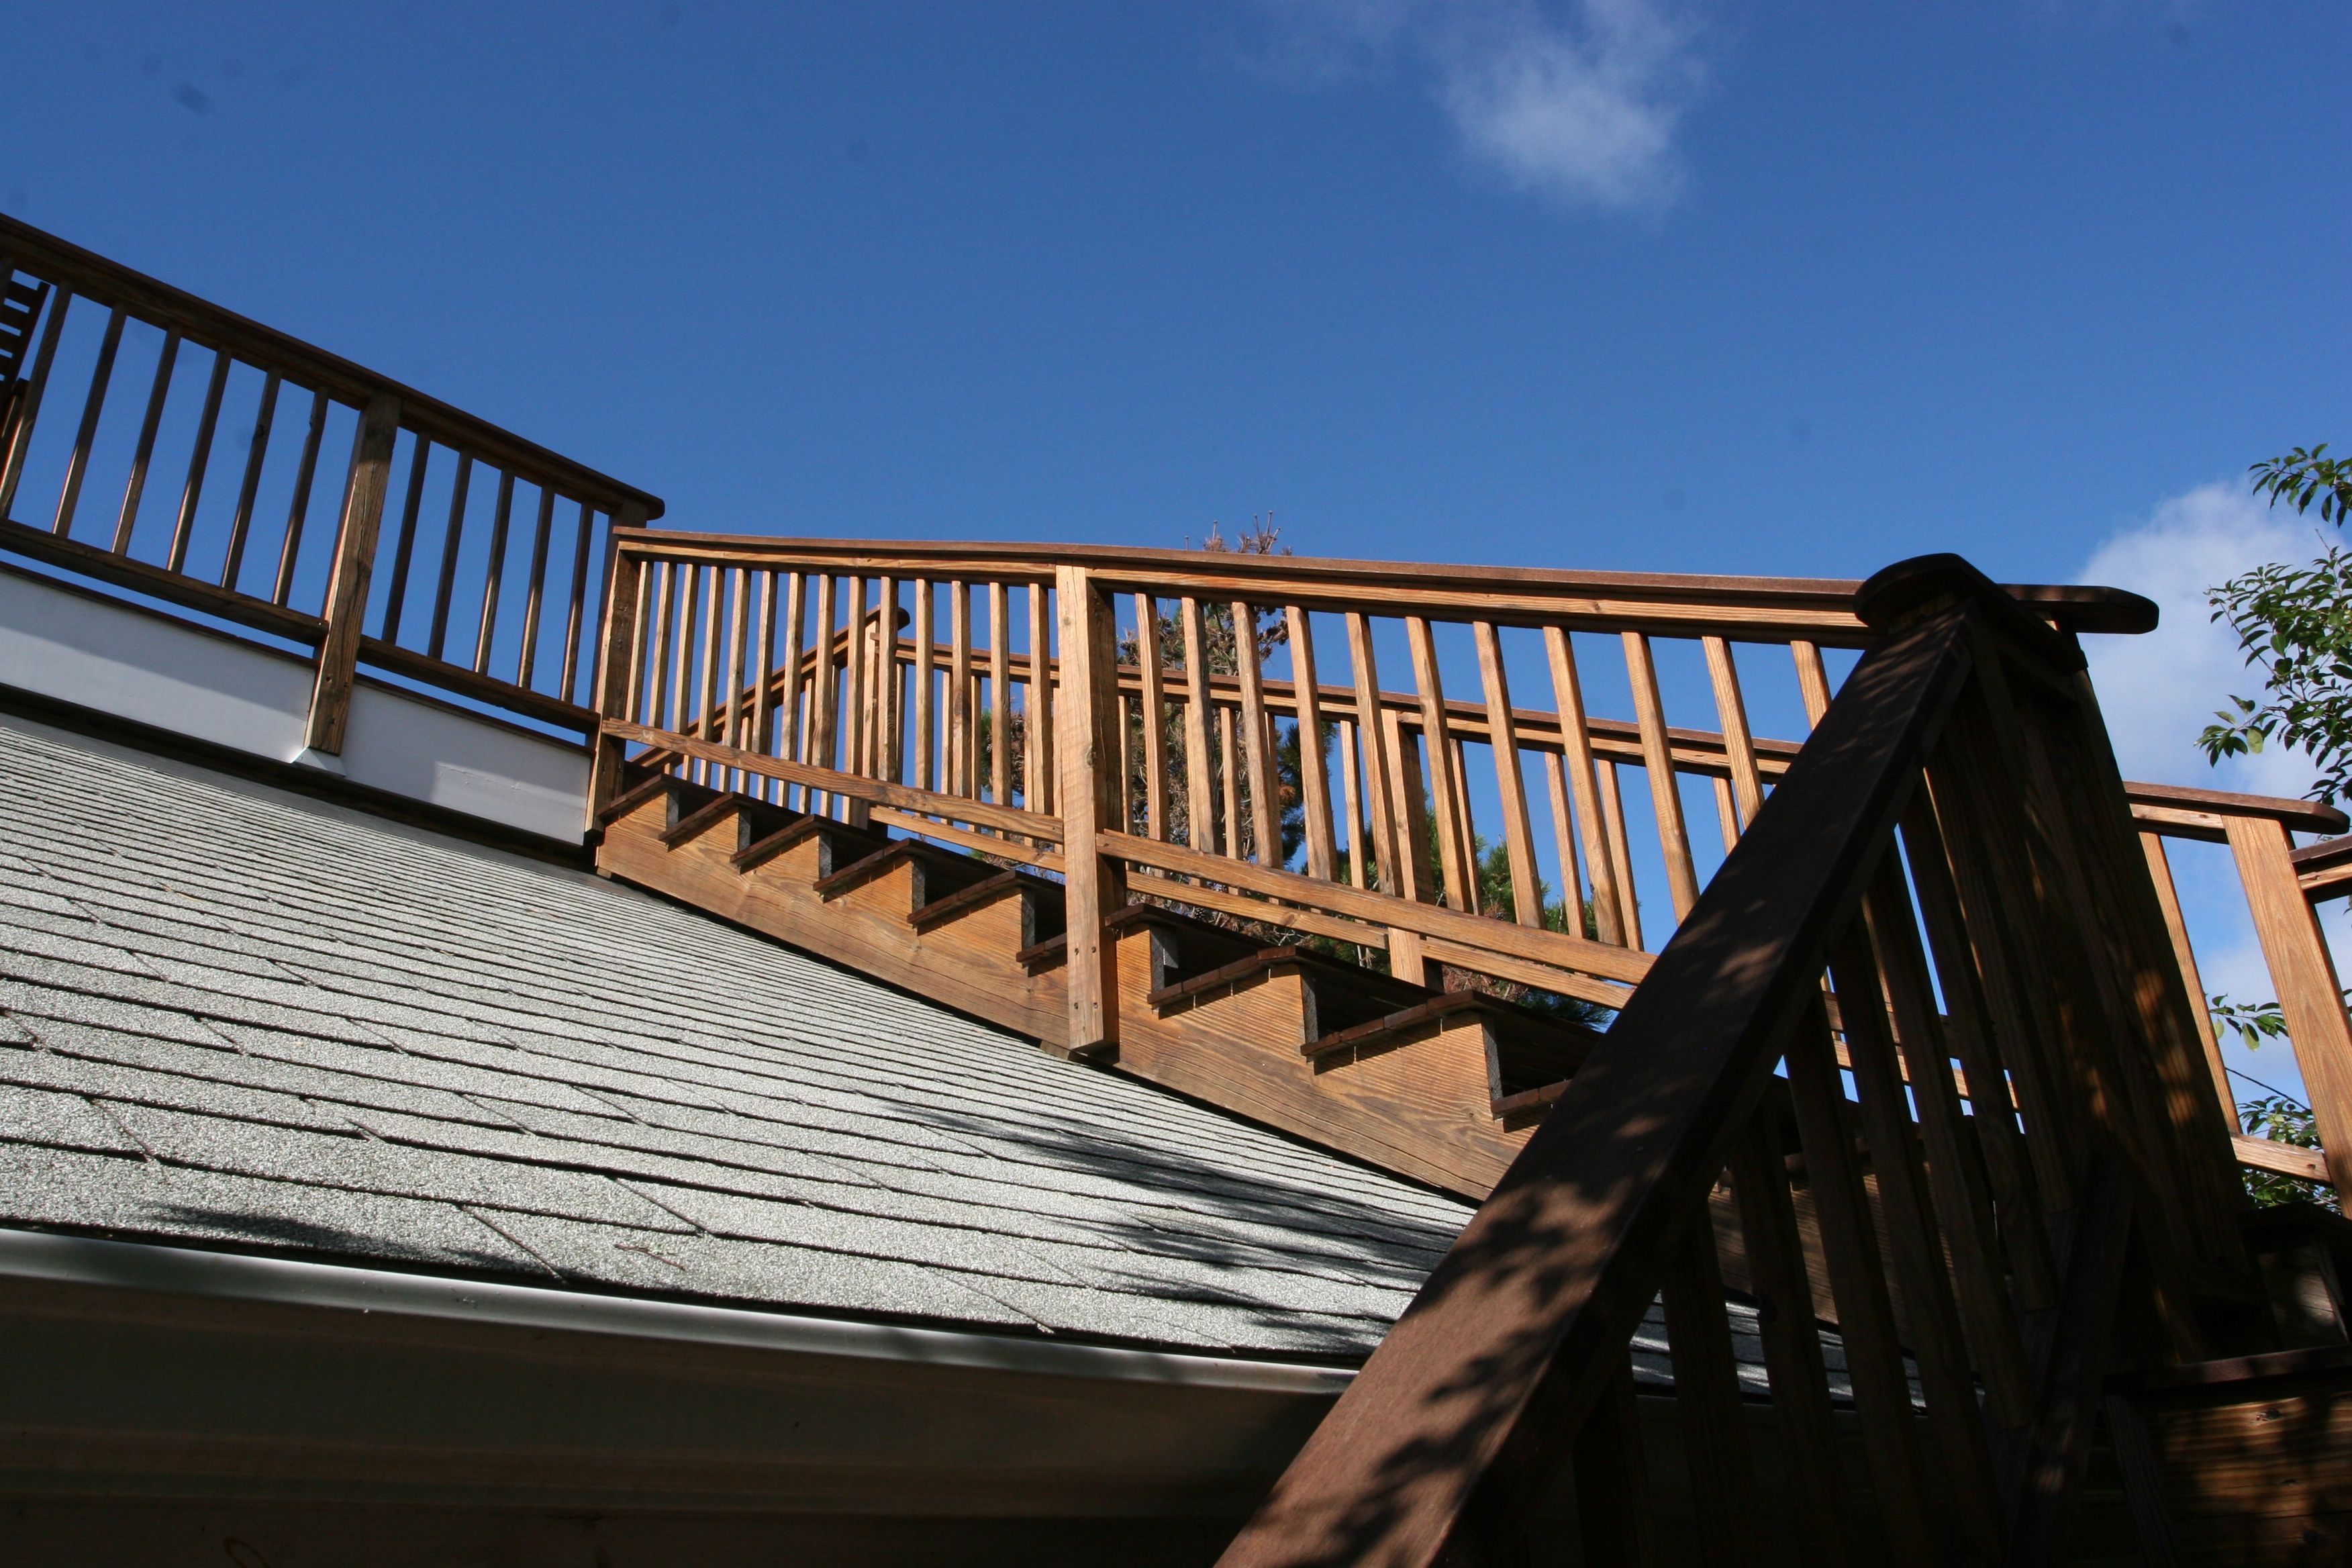 It had a deck on the top of the roof, accessible by an outdoor staircase.